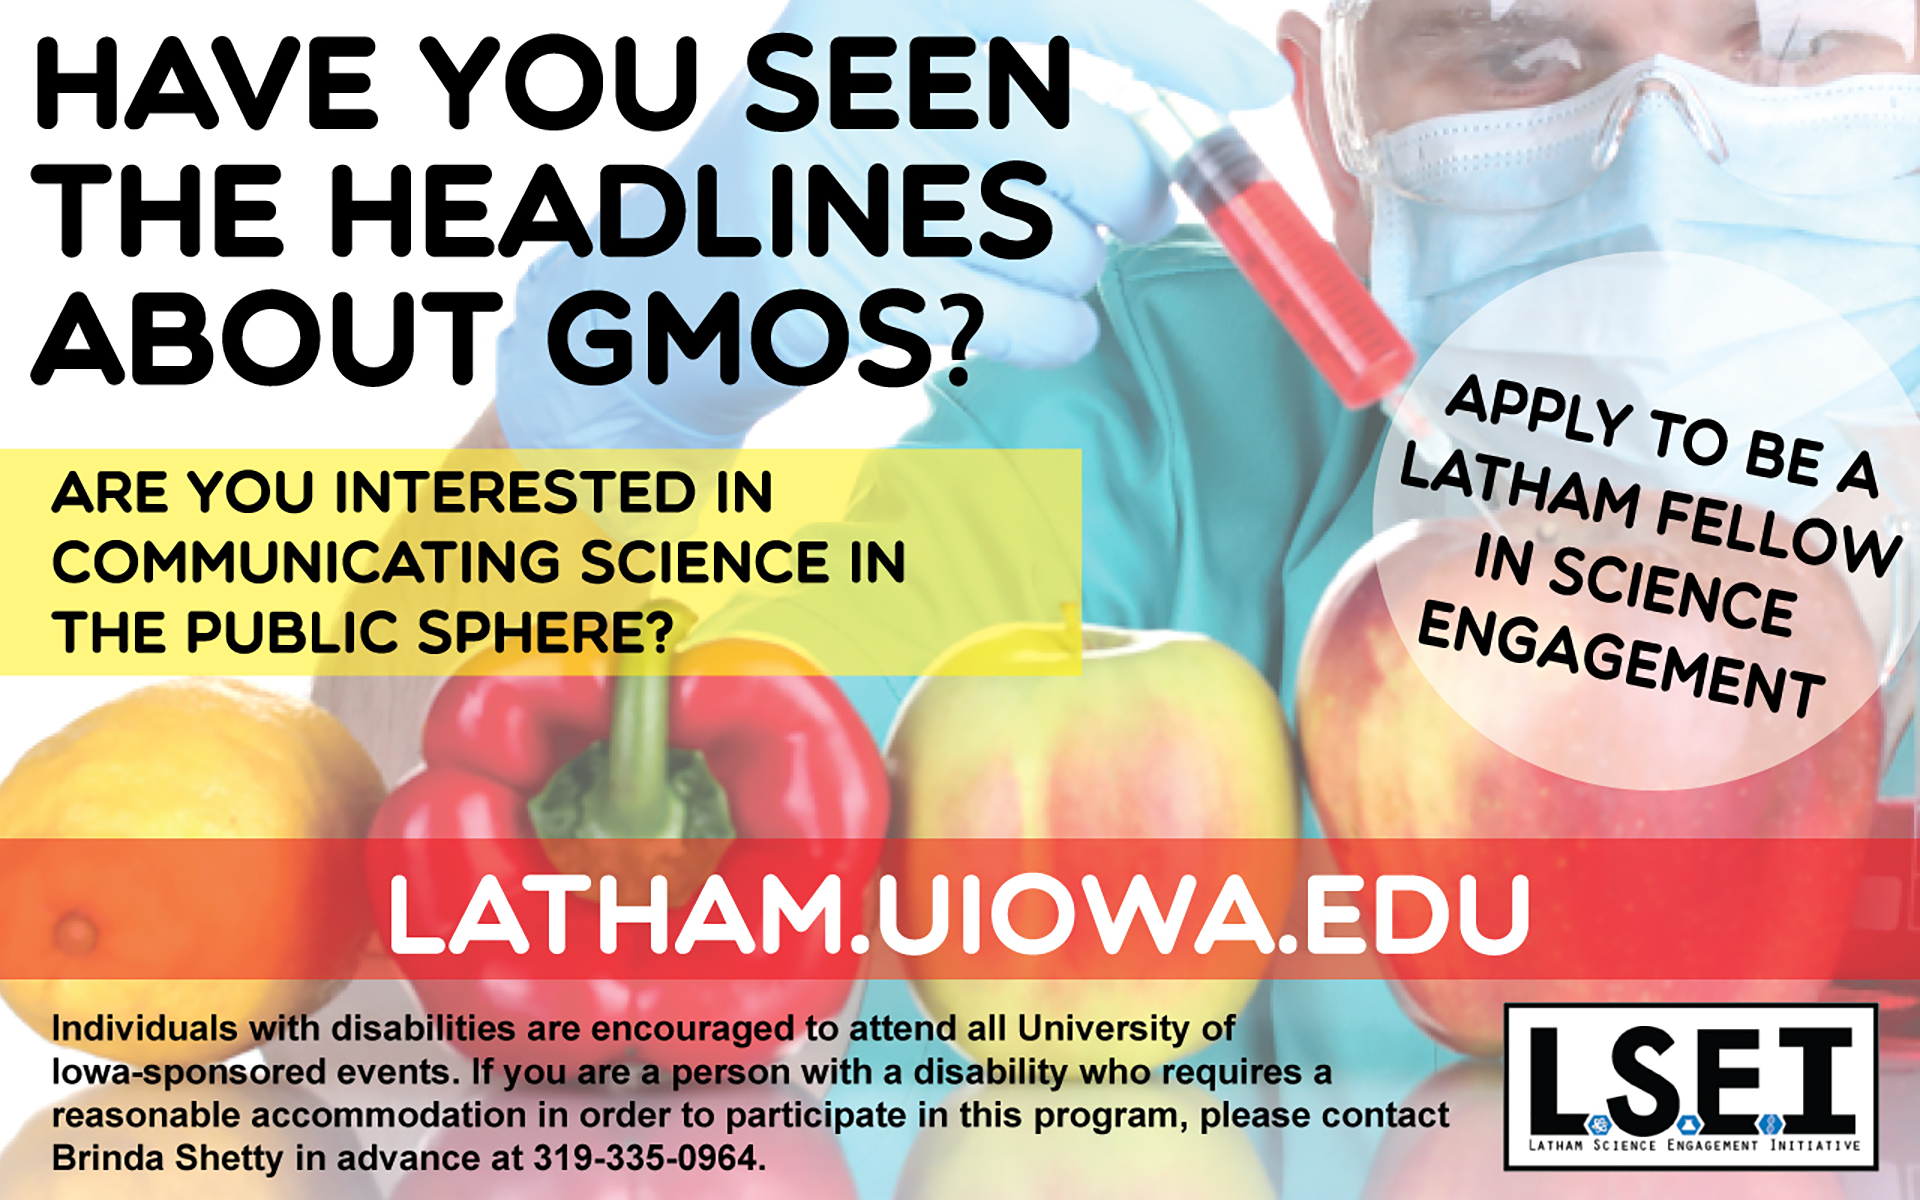 Latham Fellow in Science Engineering – are you interested?